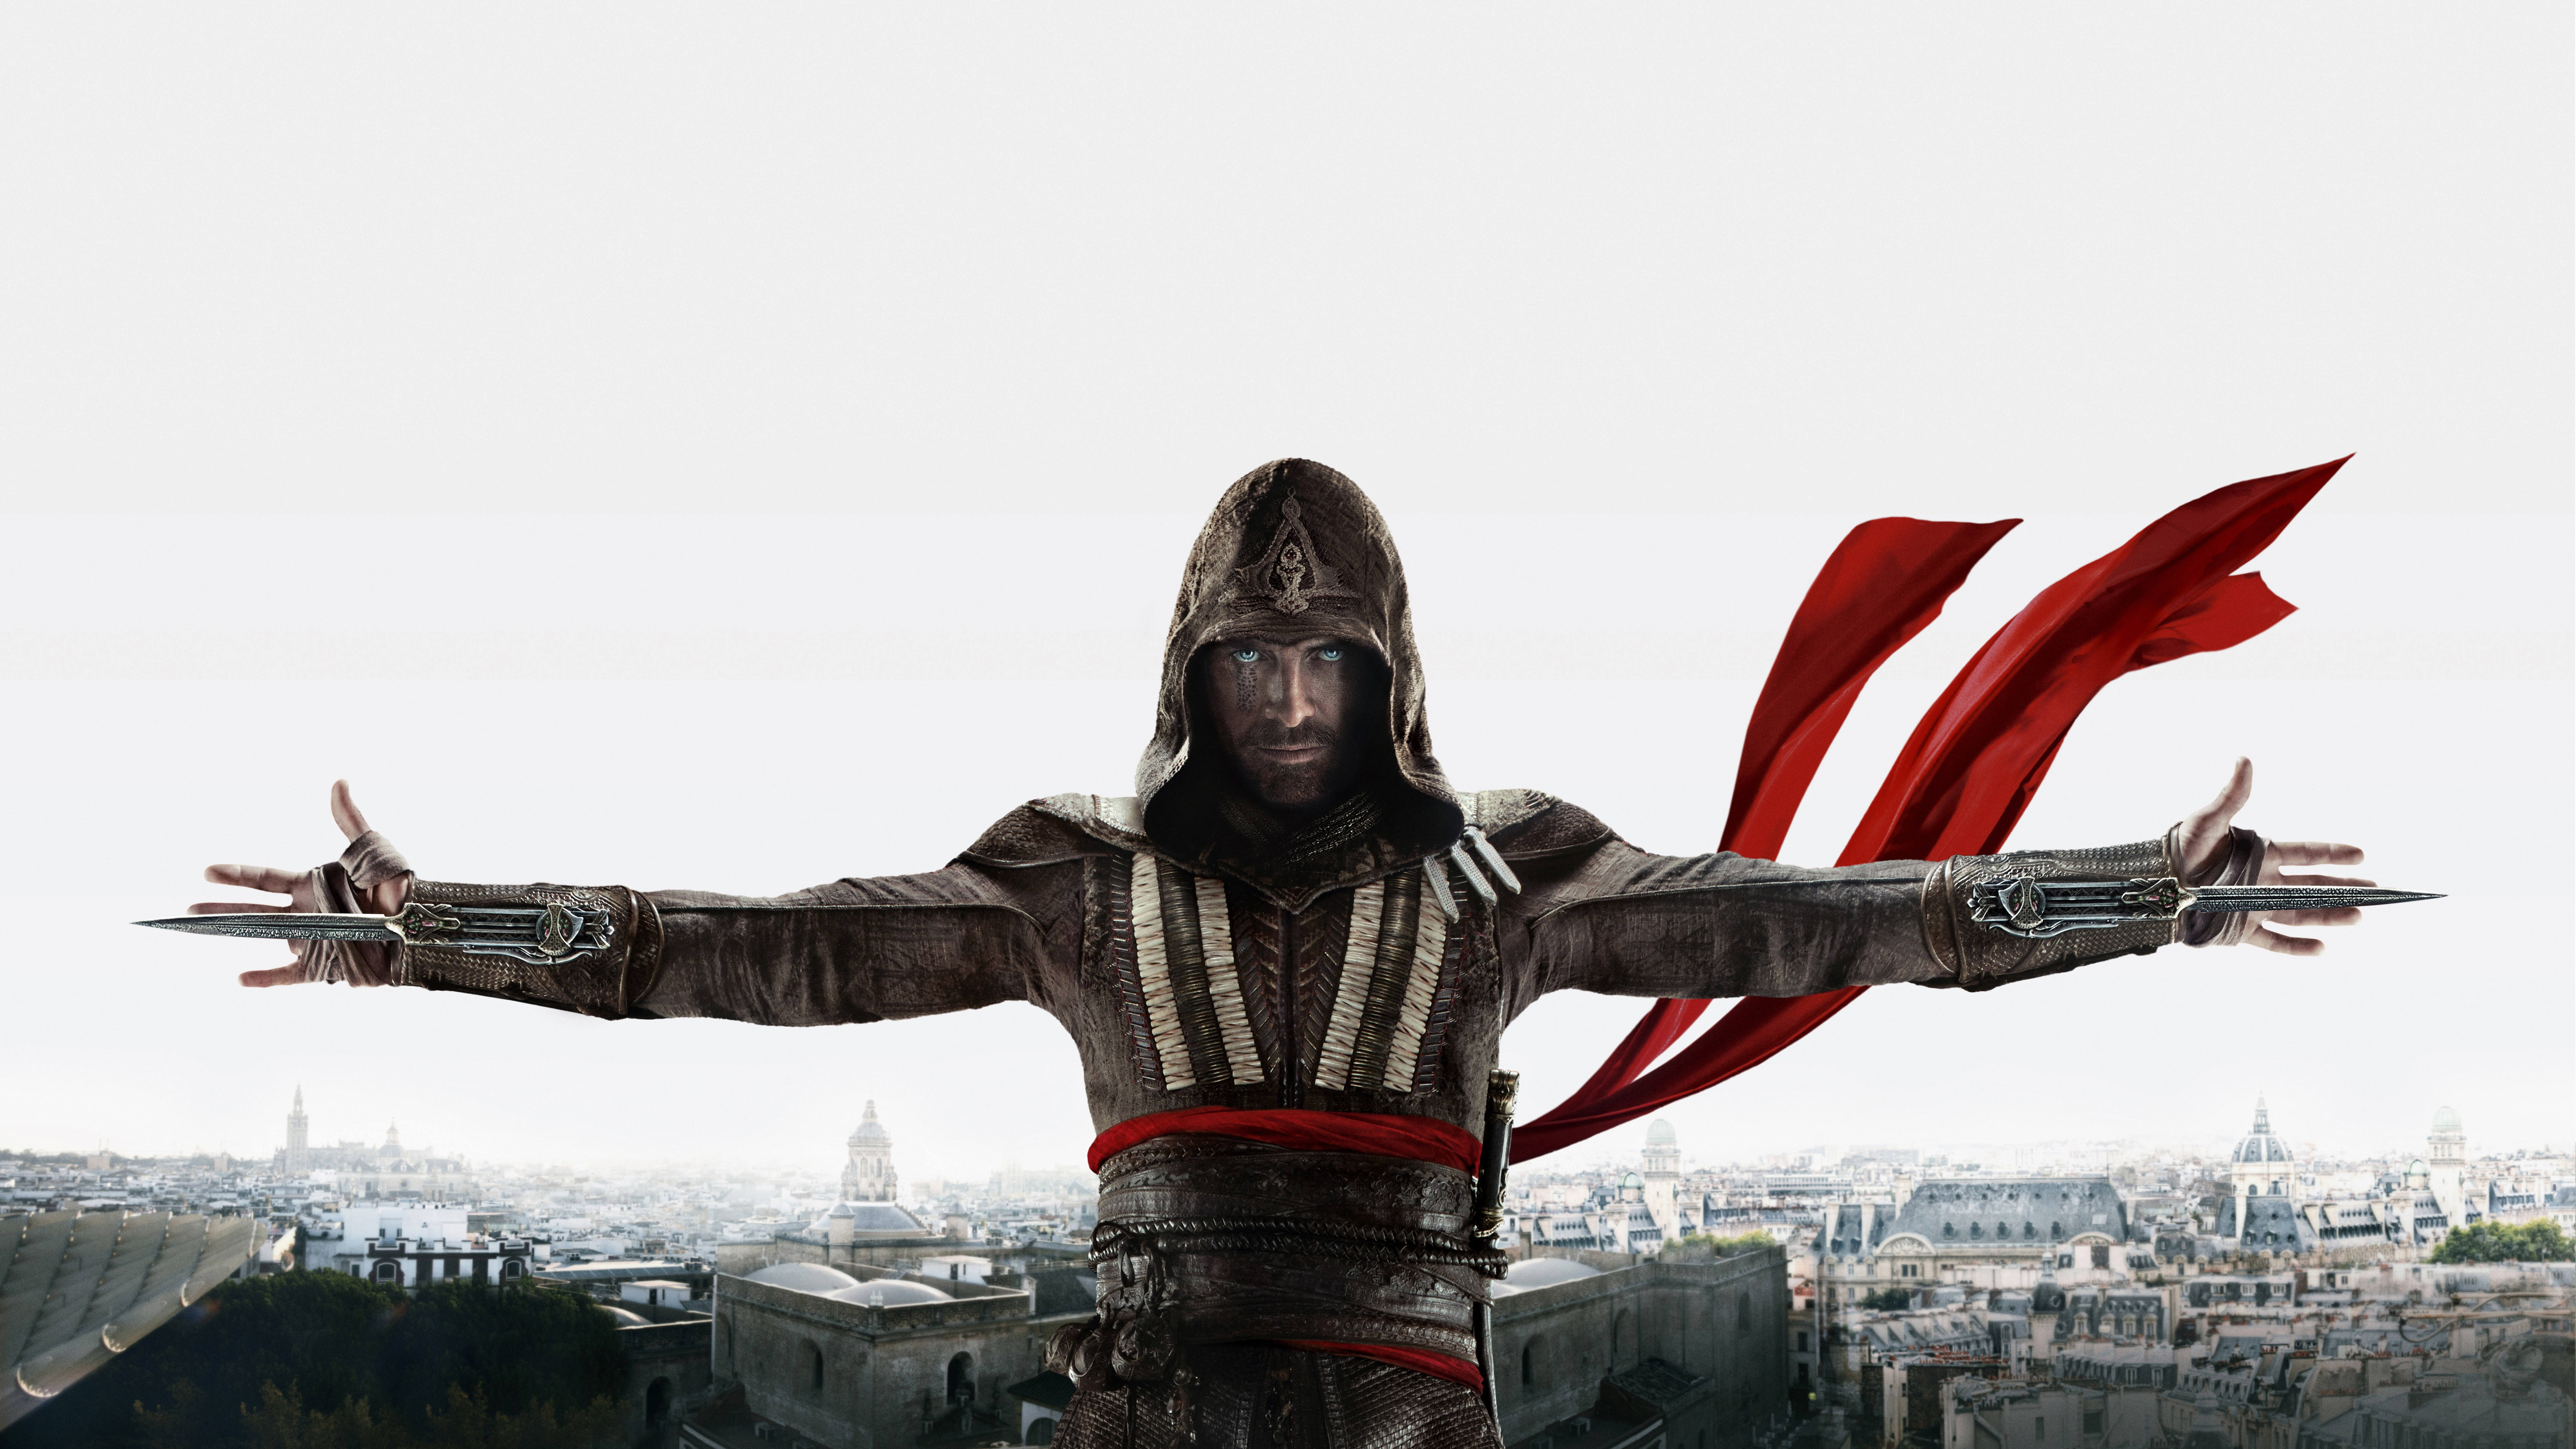 General 7500x4219 Assassin's Creed Assassin's Creed (movie) video game characters men movies Michael Fassbender